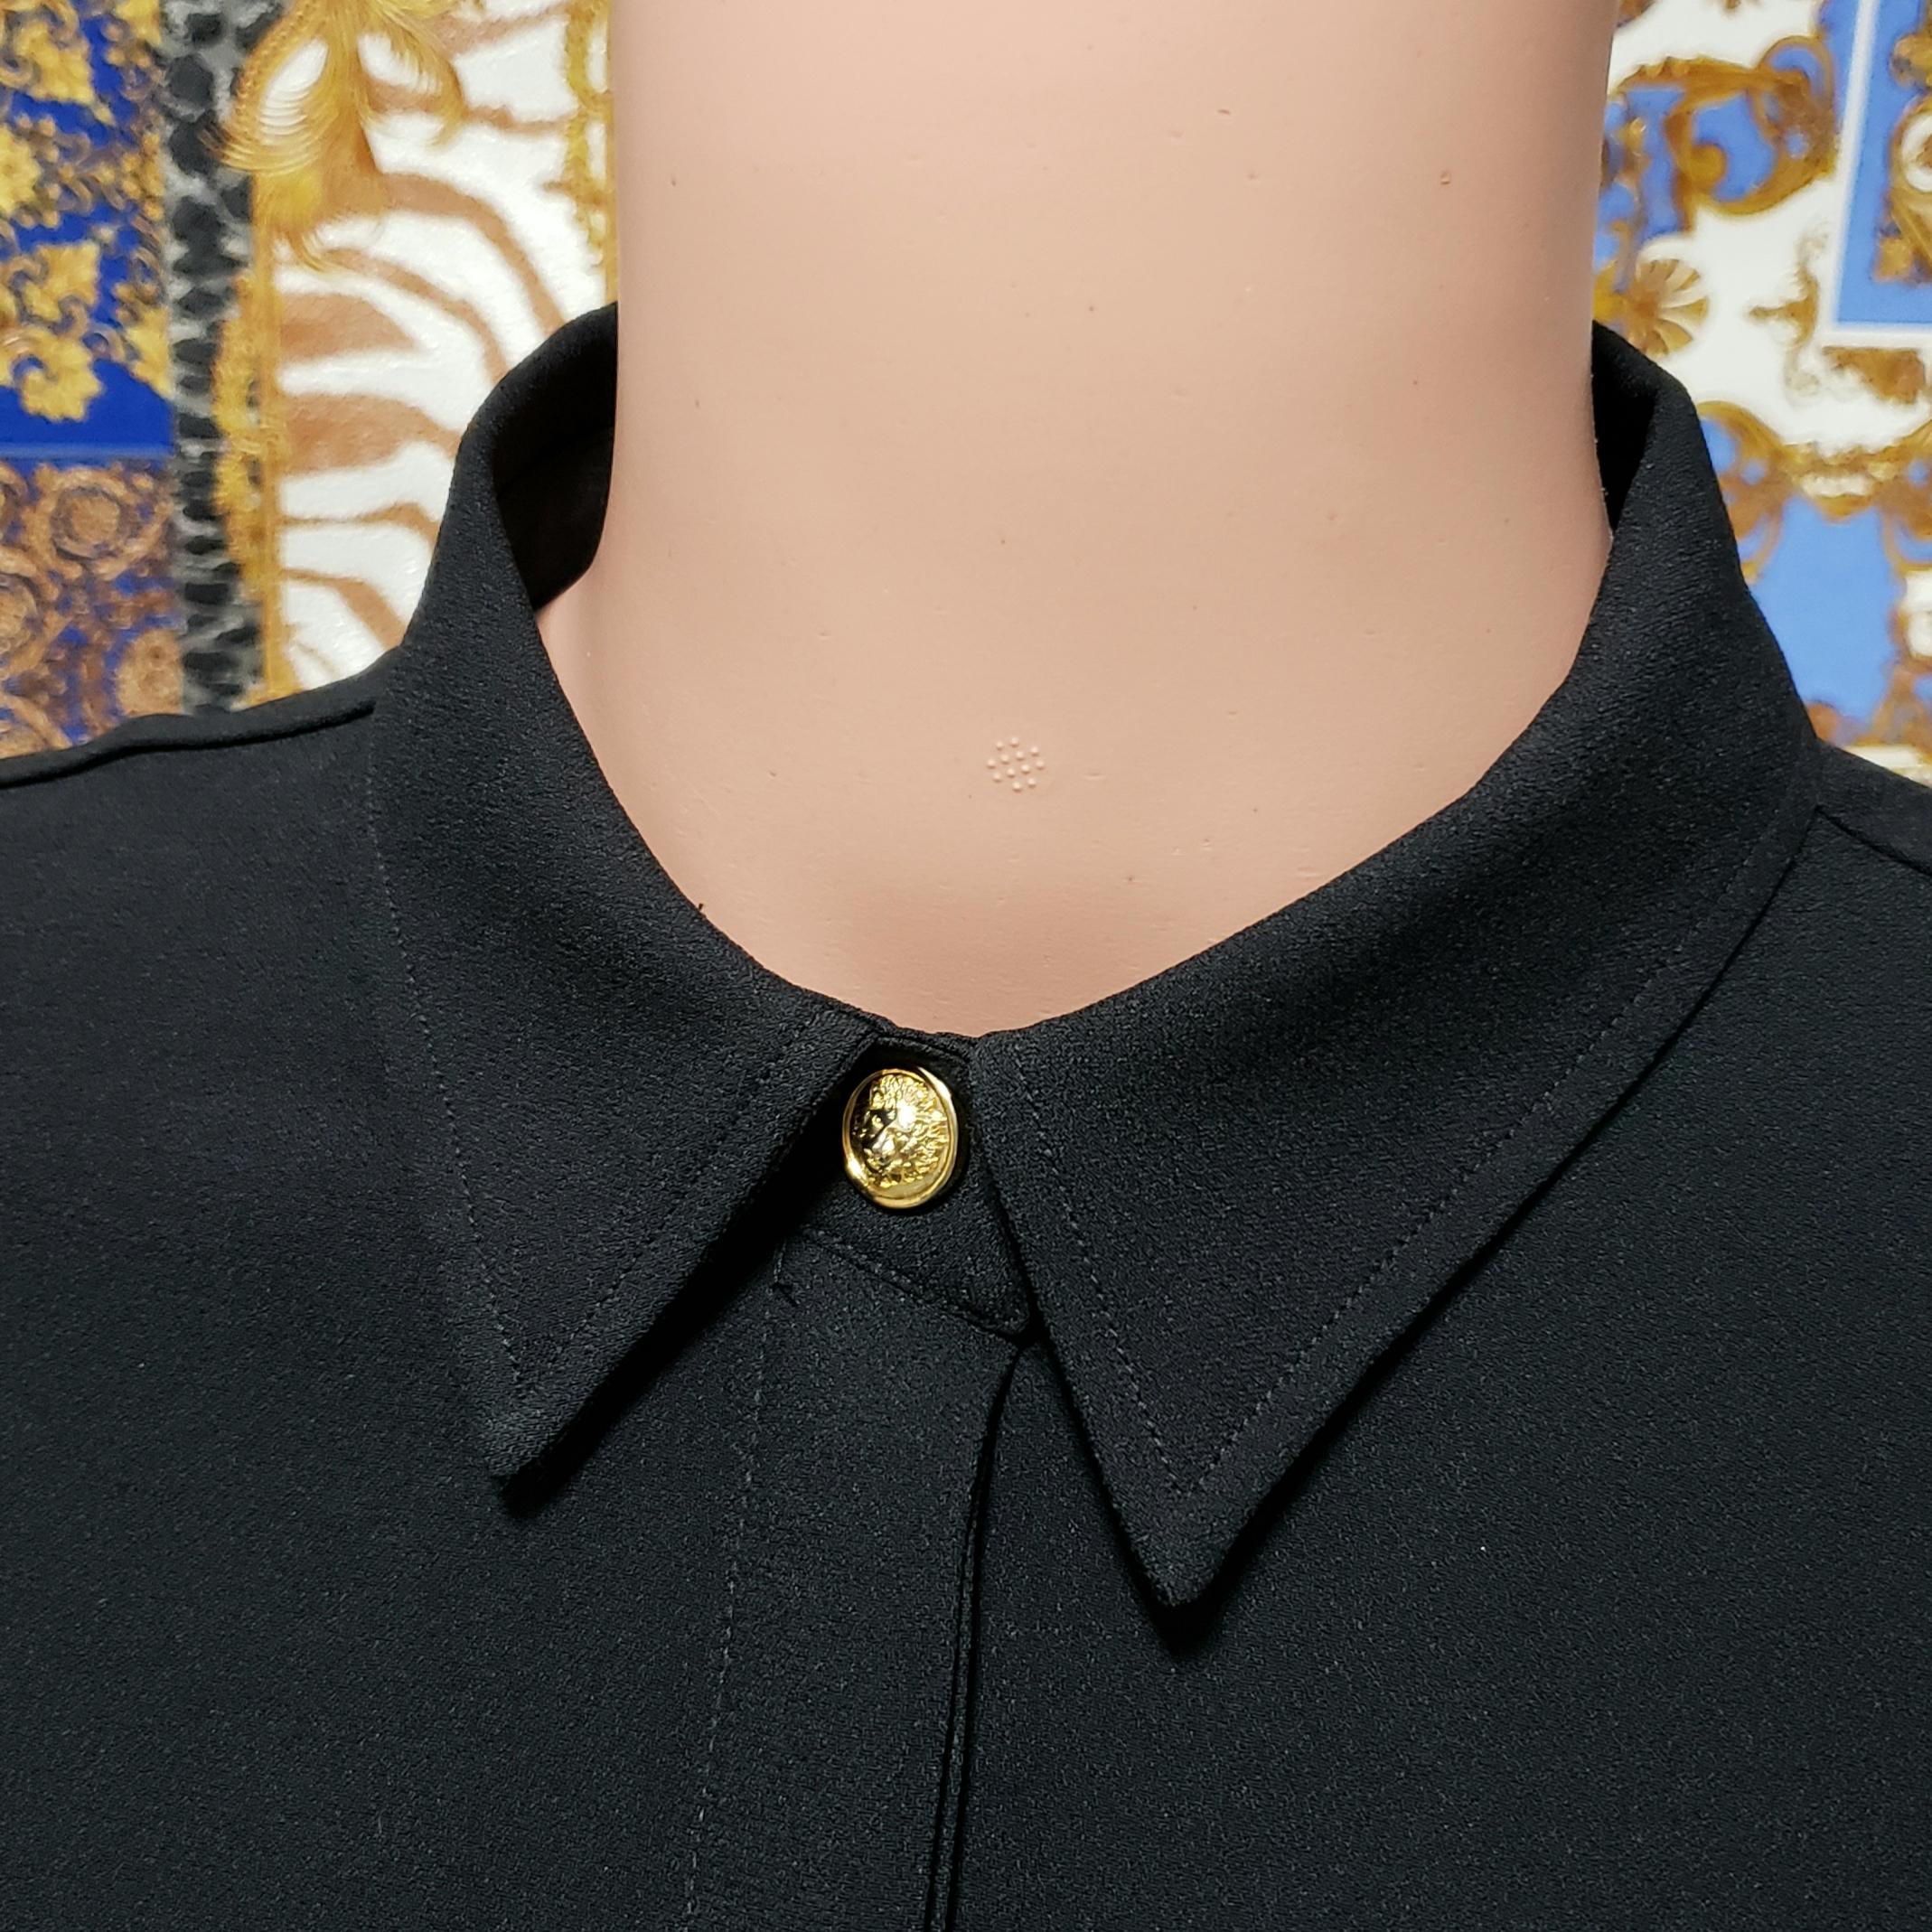 VERSUS VERSACE BLACK LONG SLEEVE SHIRT with GOLD-TONE LION PINS 38 - 2 In New Condition For Sale In Montgomery, TX